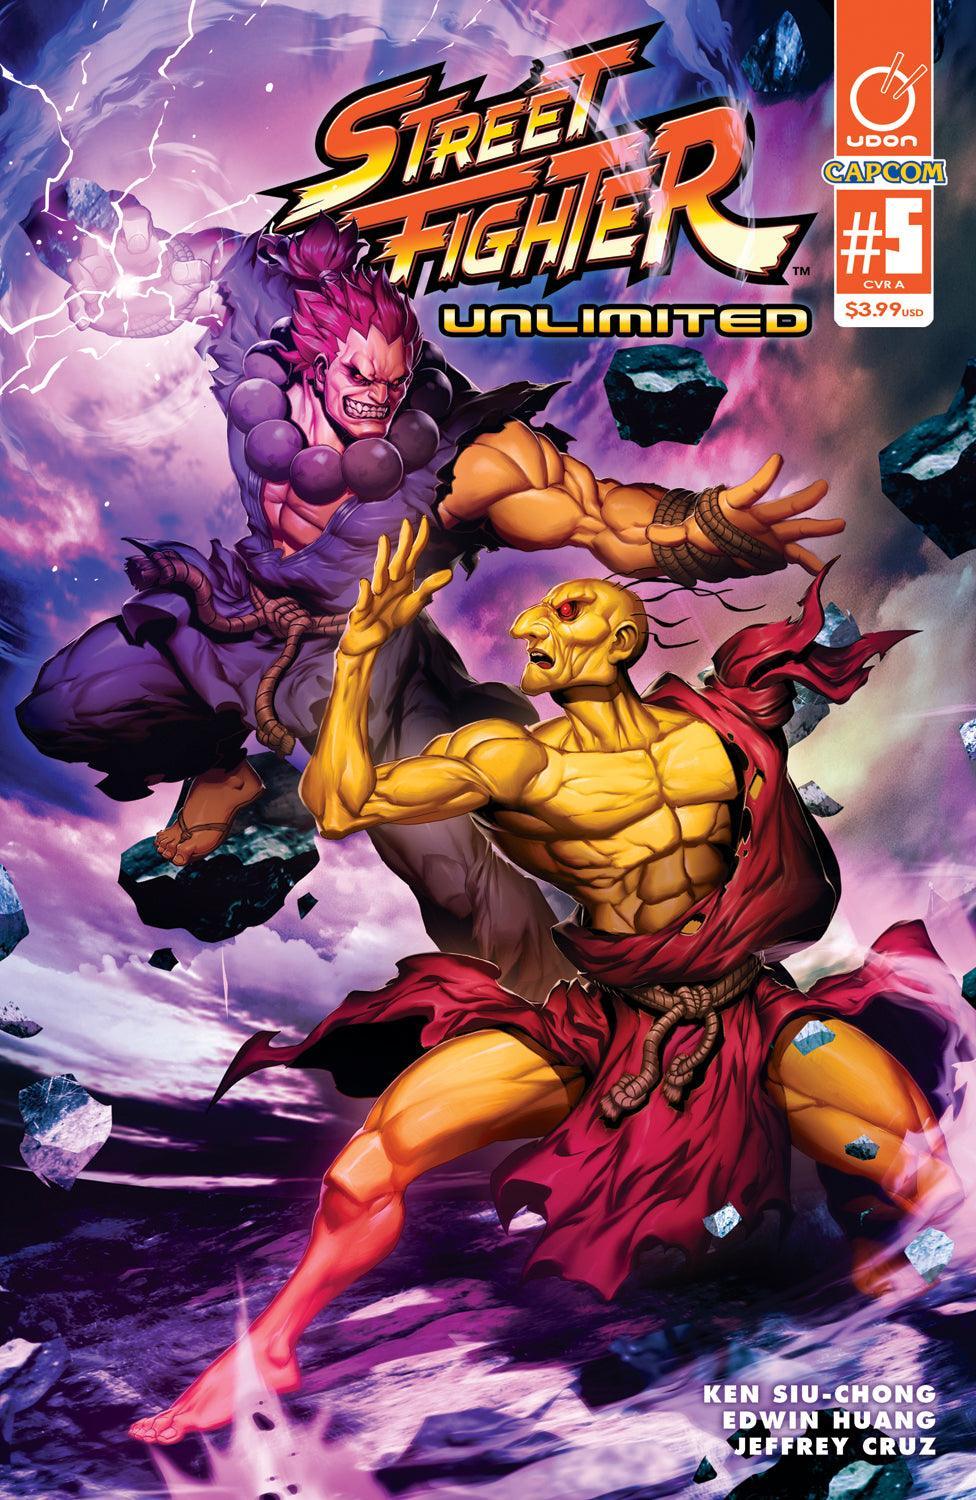 STREET FIGHTER UNLIMITED #5 - Kings Comics